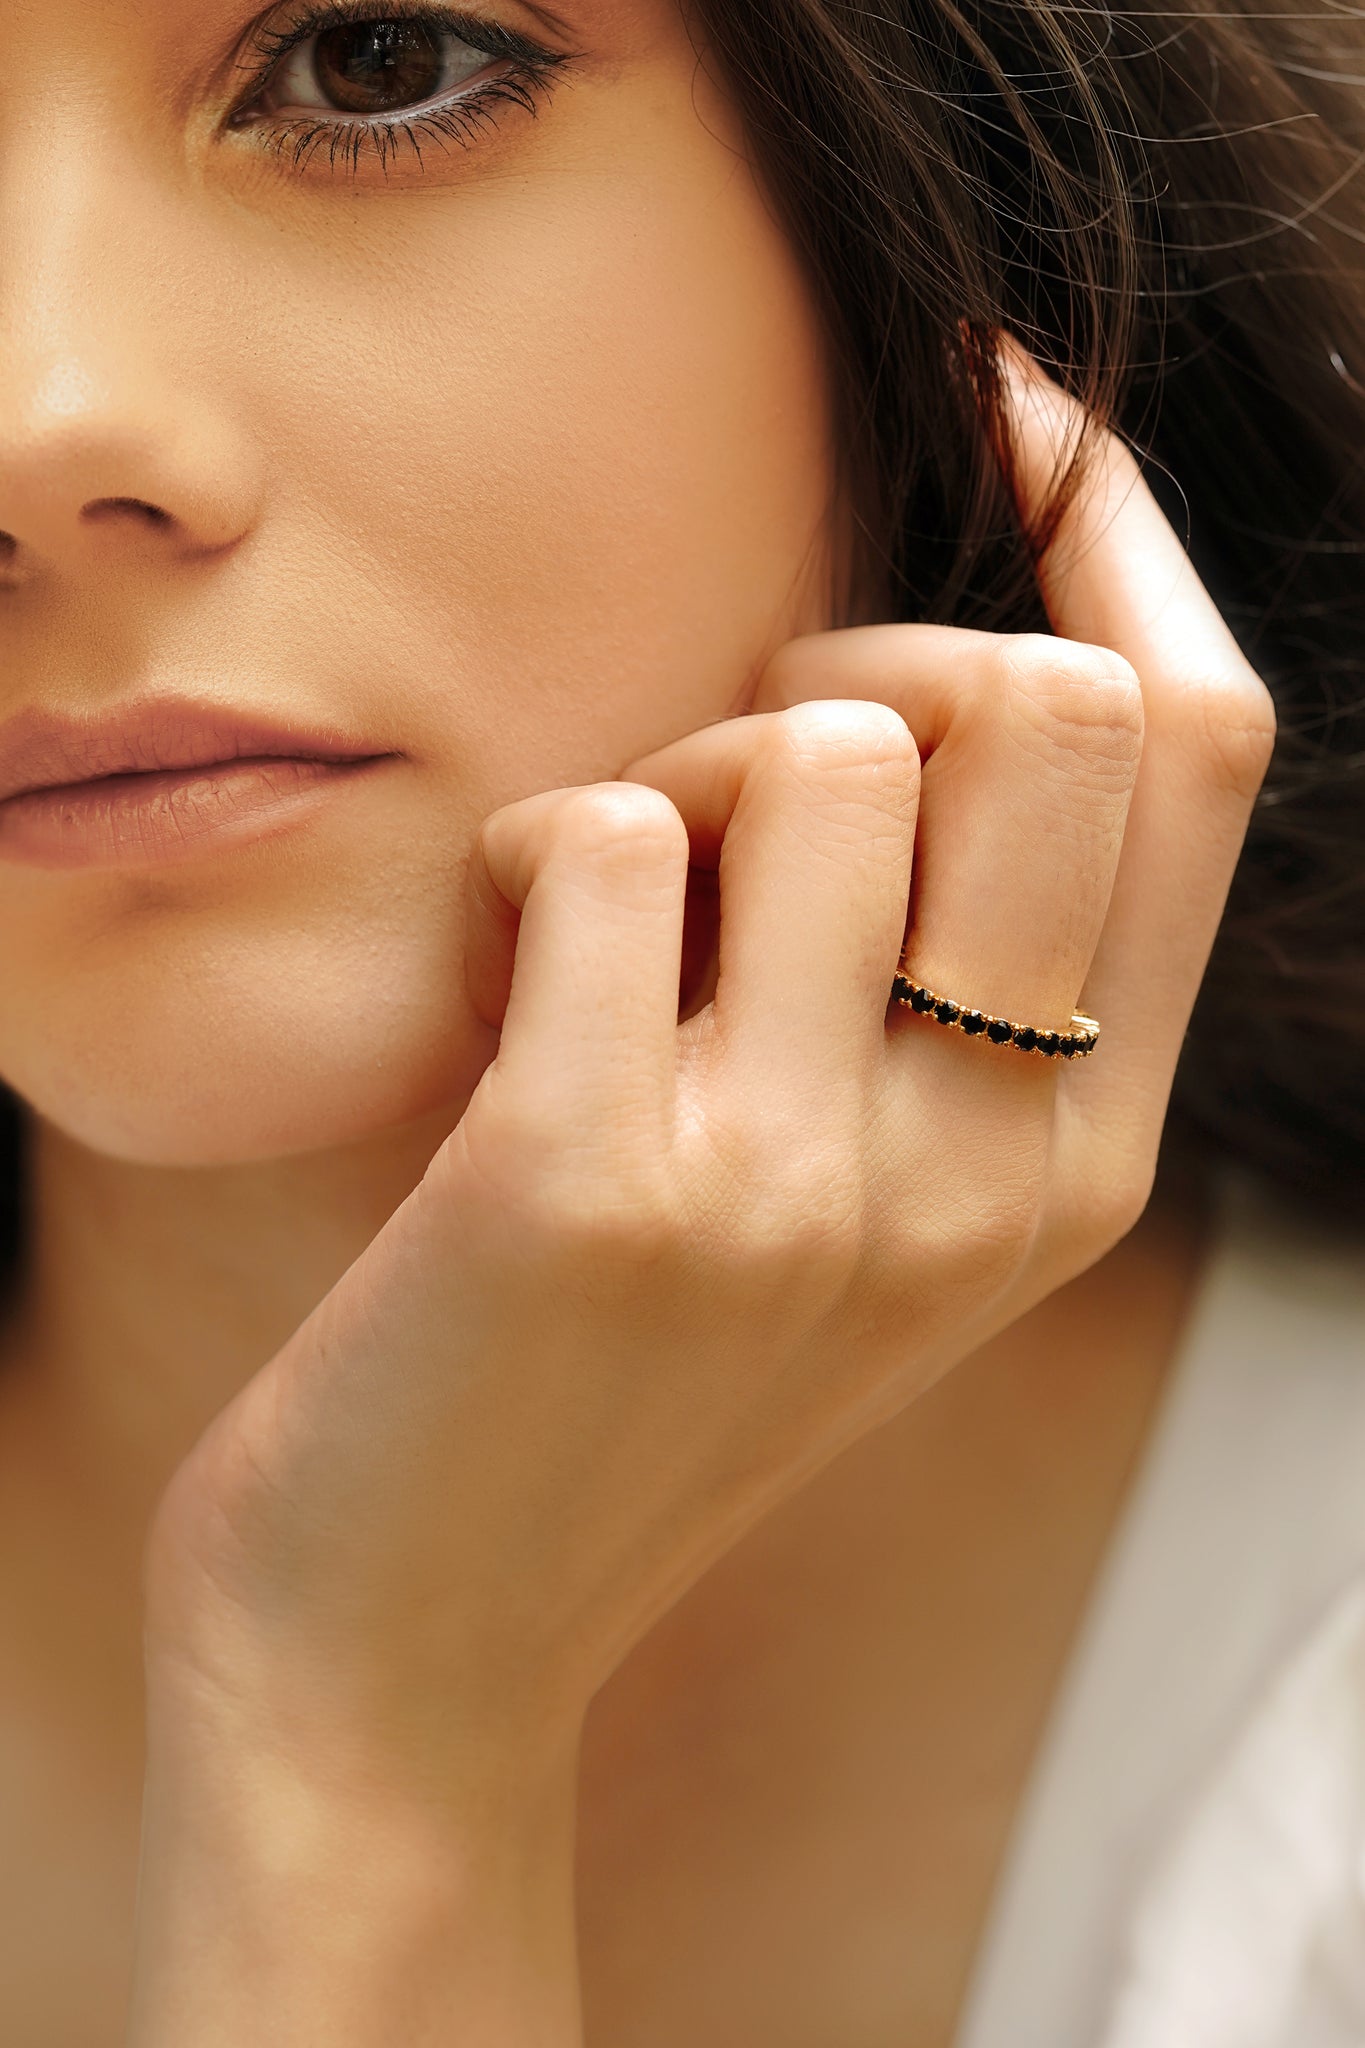 Classic Eternity Band - Midnight Gold